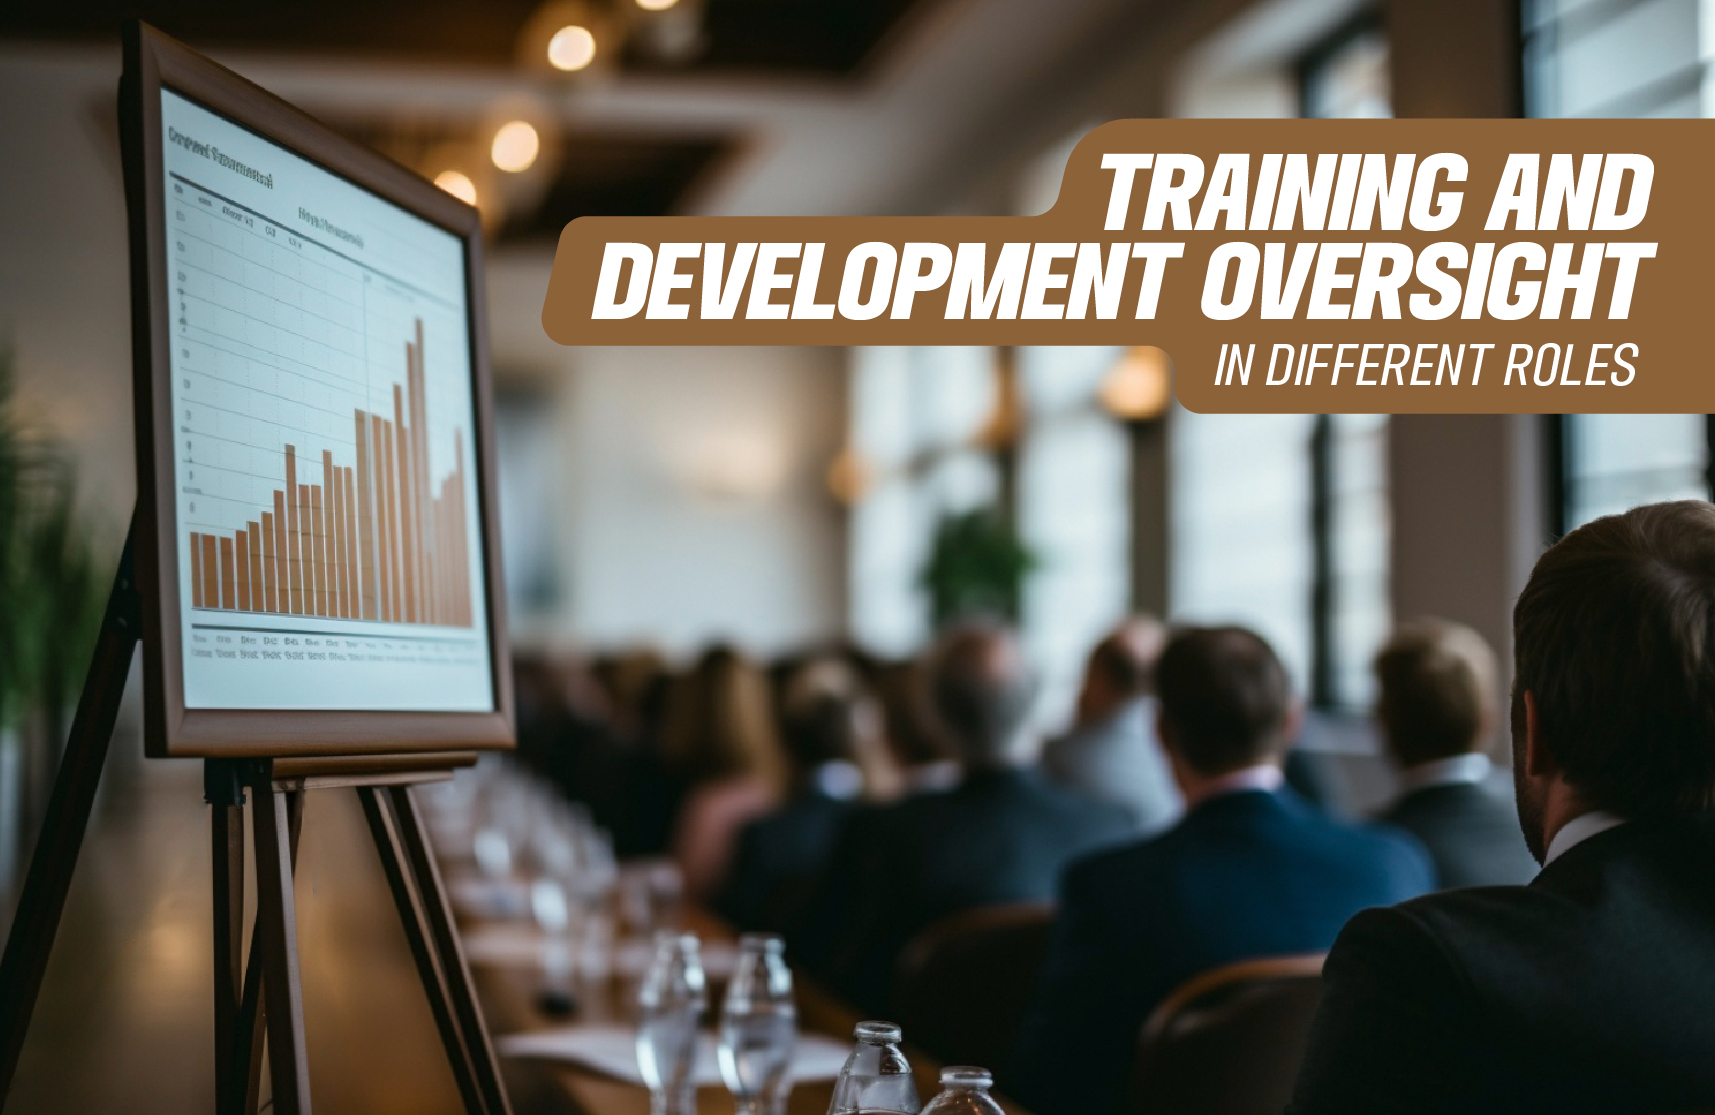 Training and Development Oversight in Different Roles